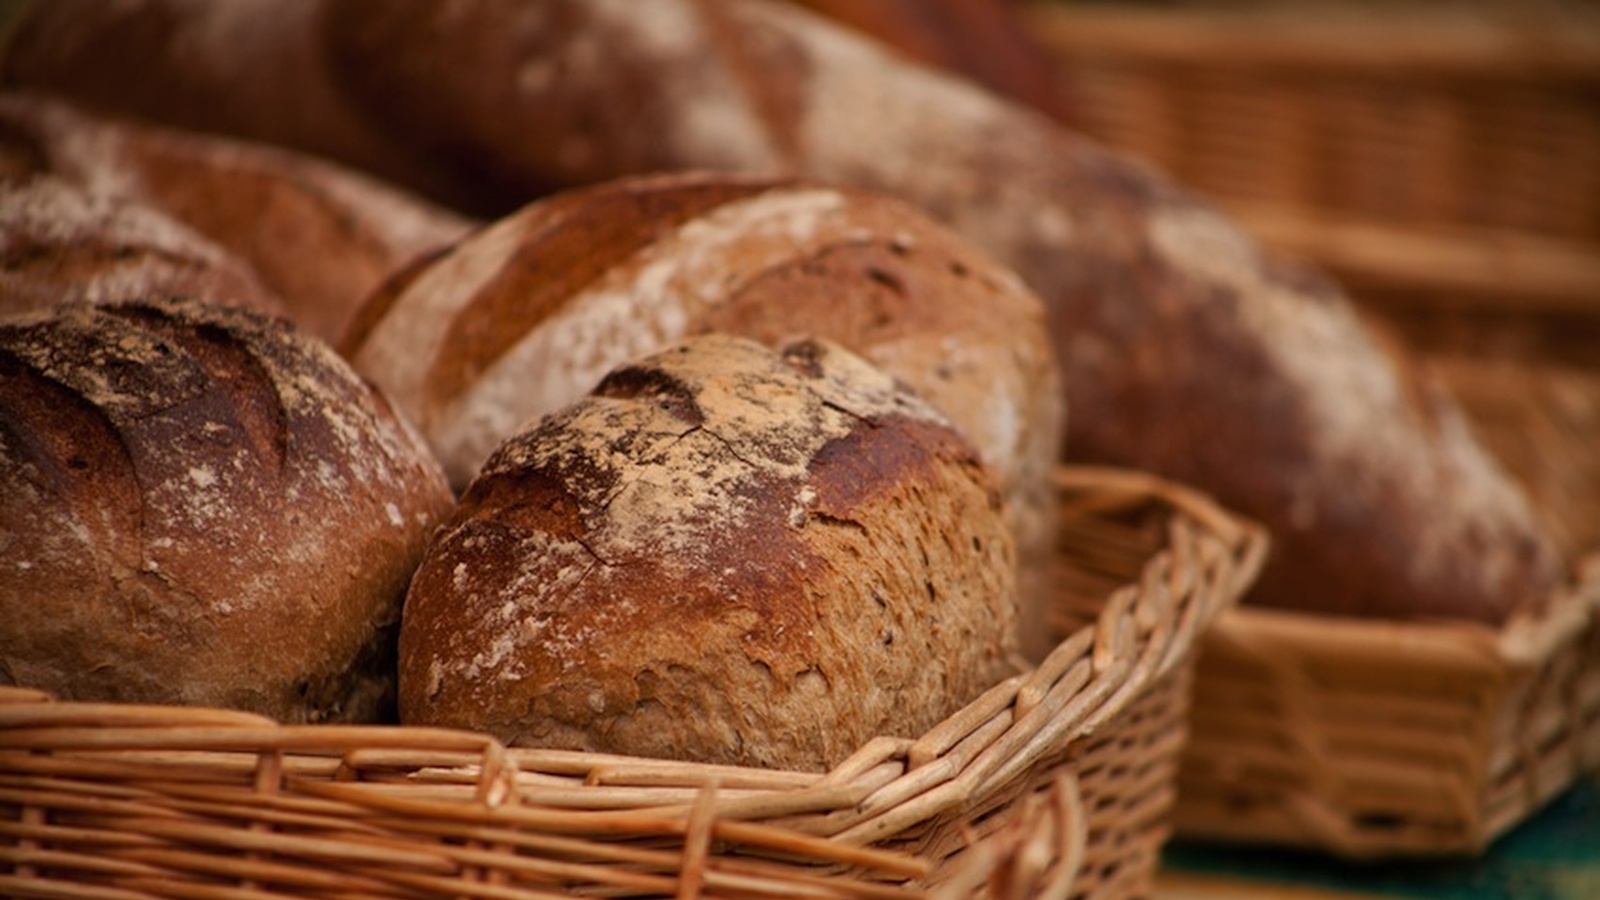 Does Cutting Out Gluten Really Make You Feel Better?